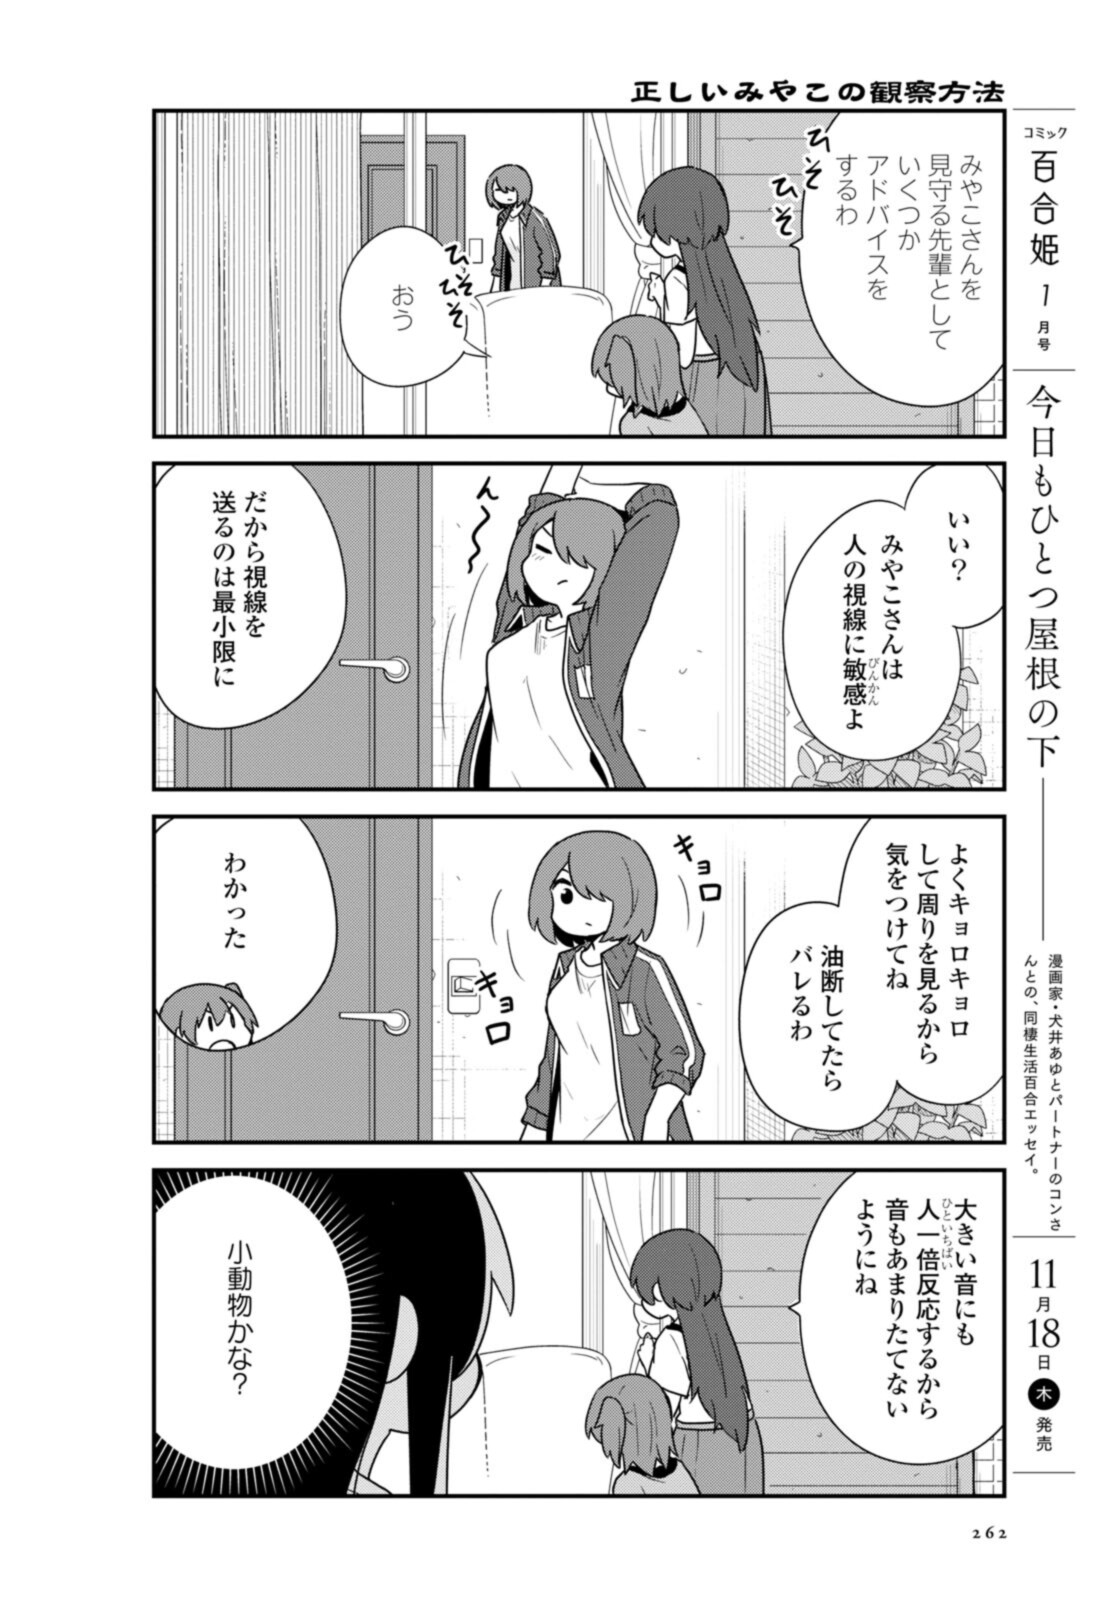 Wataten! An Angel Flew Down to Me 私に天使が舞い降りた！ 第90話 - Page 10